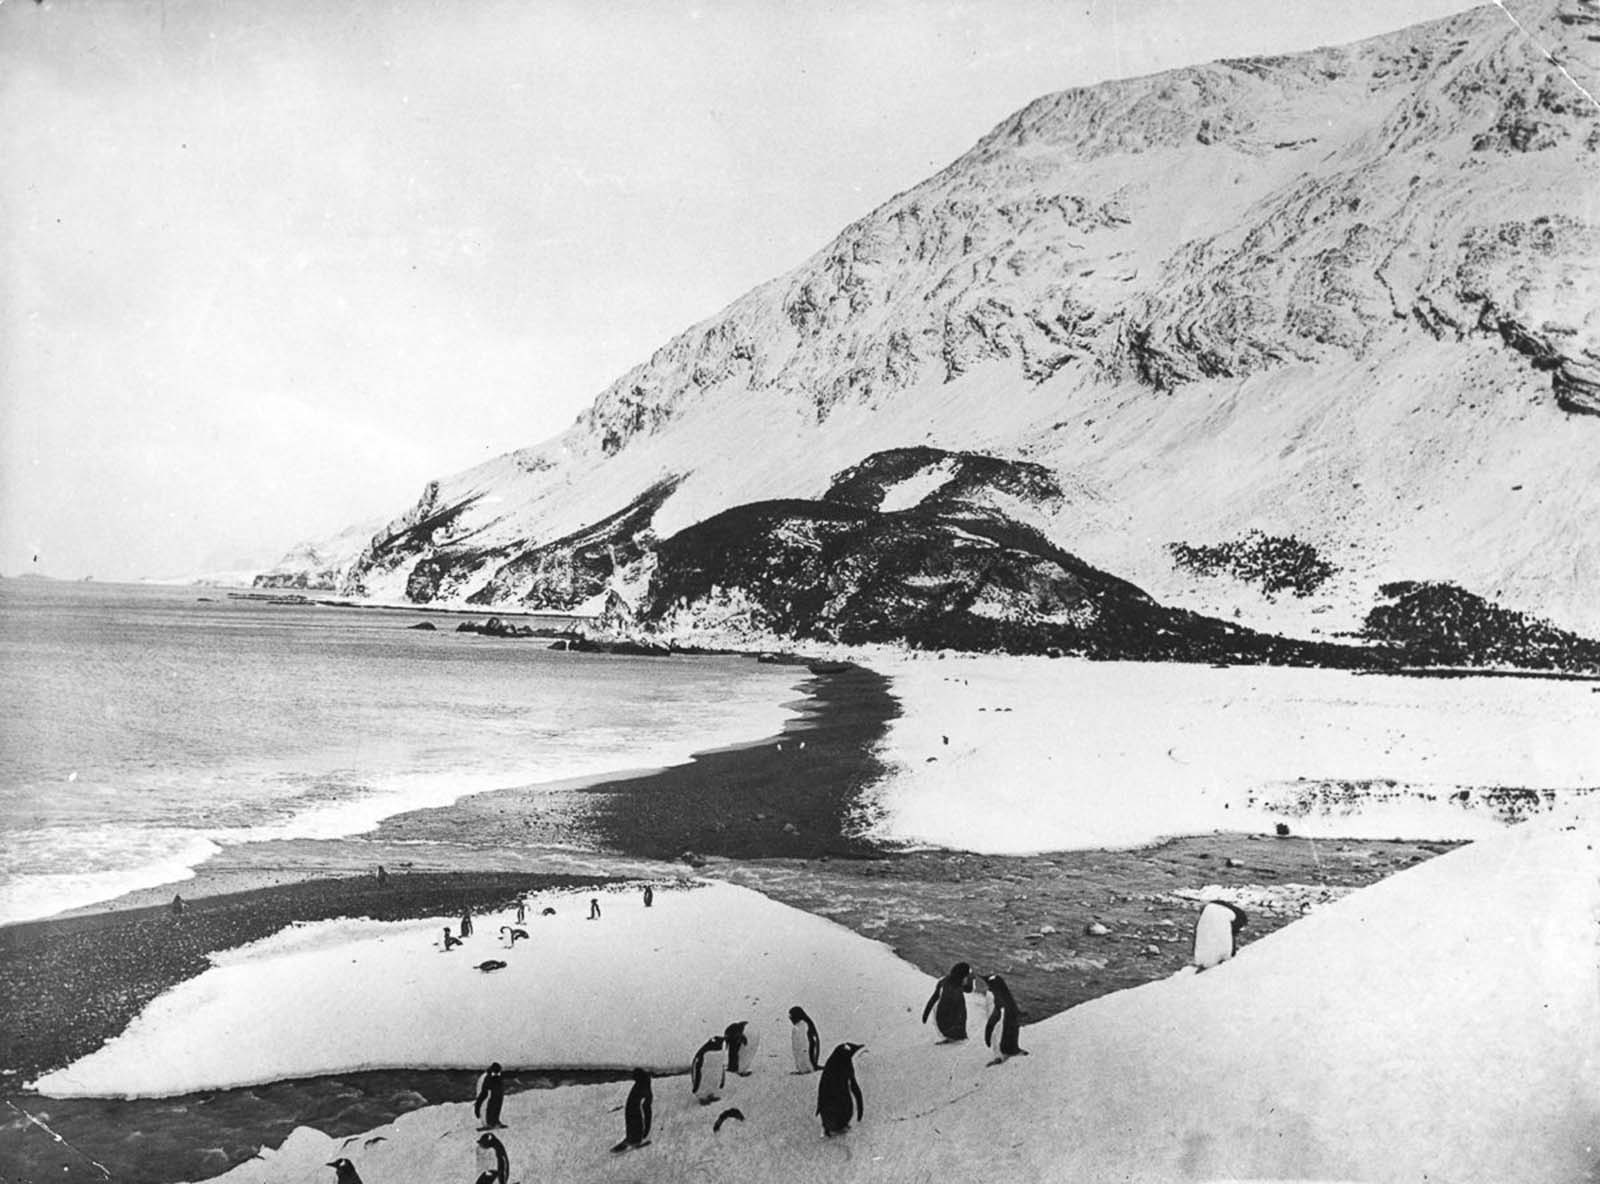 The beach on Elephant Island where the expedition made its camp.